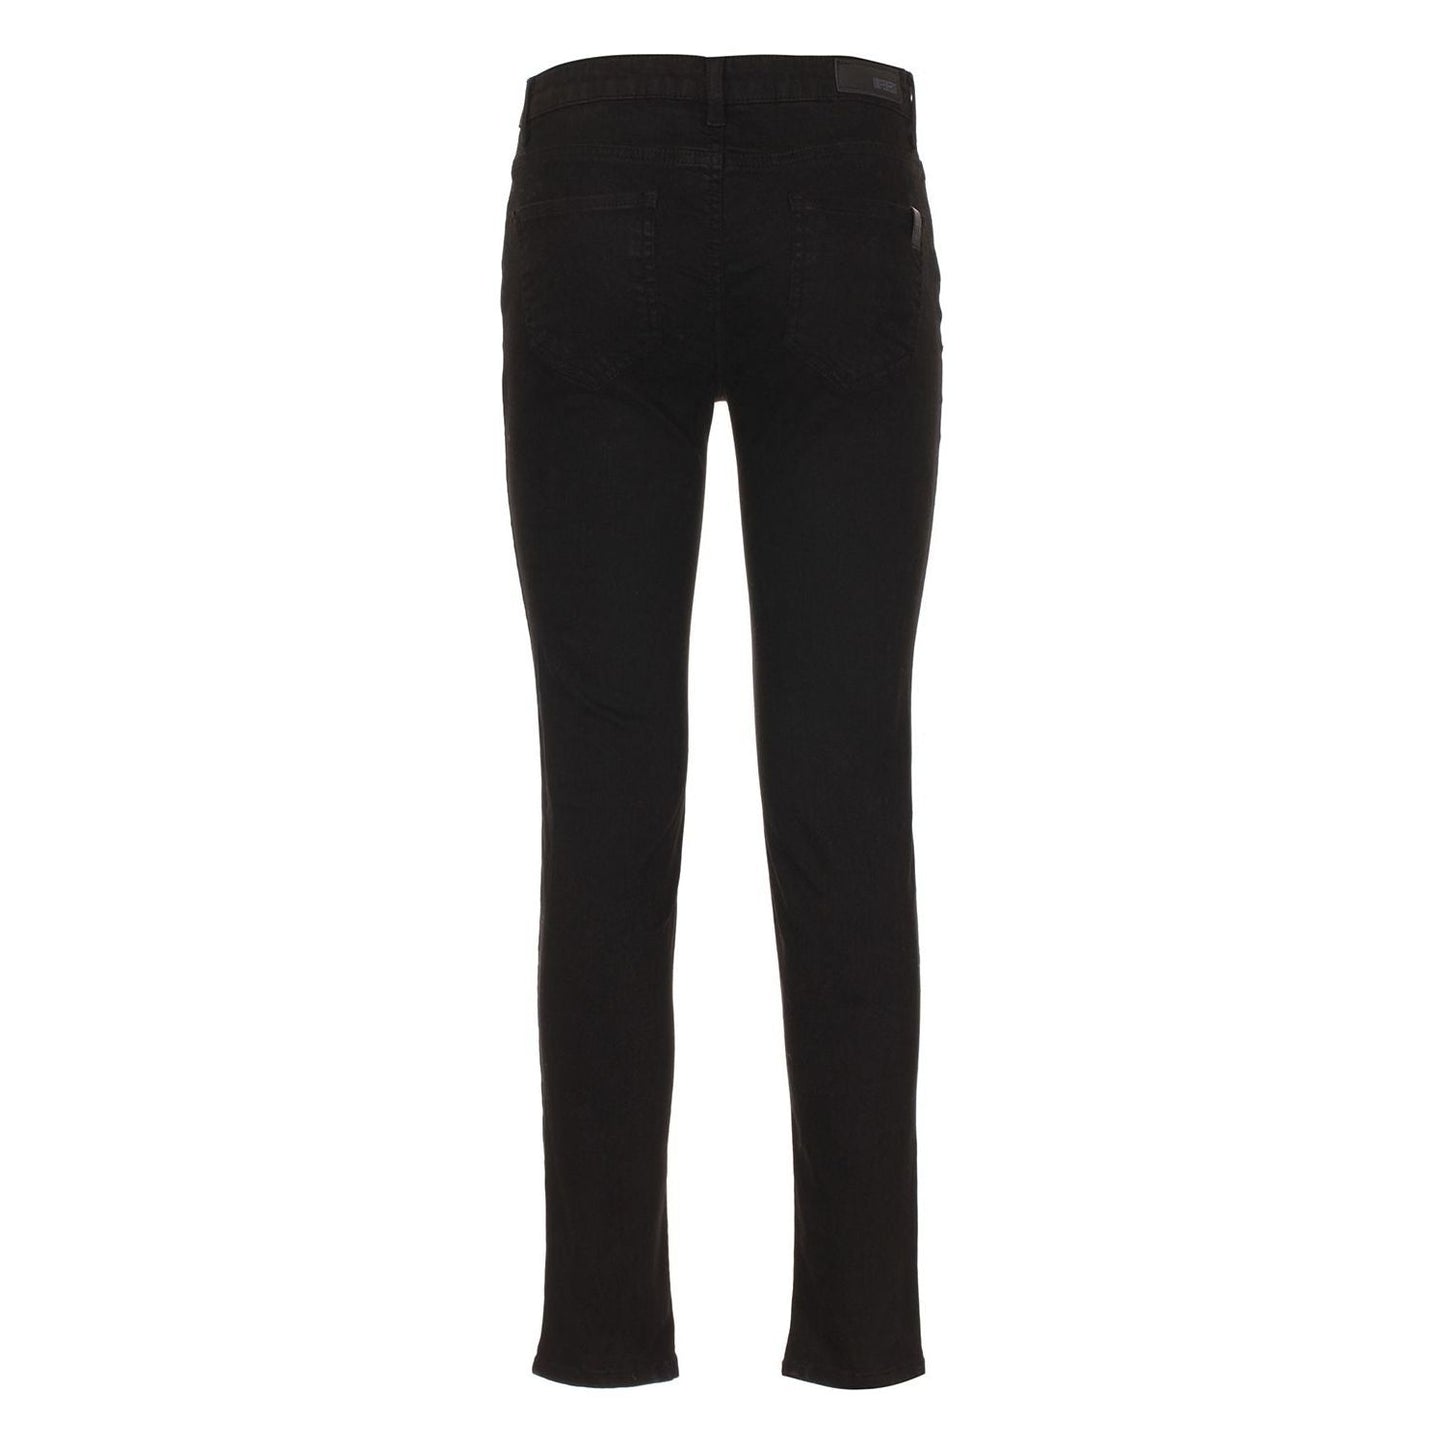 Imperfect Chic Black Cotton Blend Trousers iwwpu-imperfect-jeans-pant-1 Jeans & Pants stock_product_image_1623_1913313275-04412008-8dd.jpg